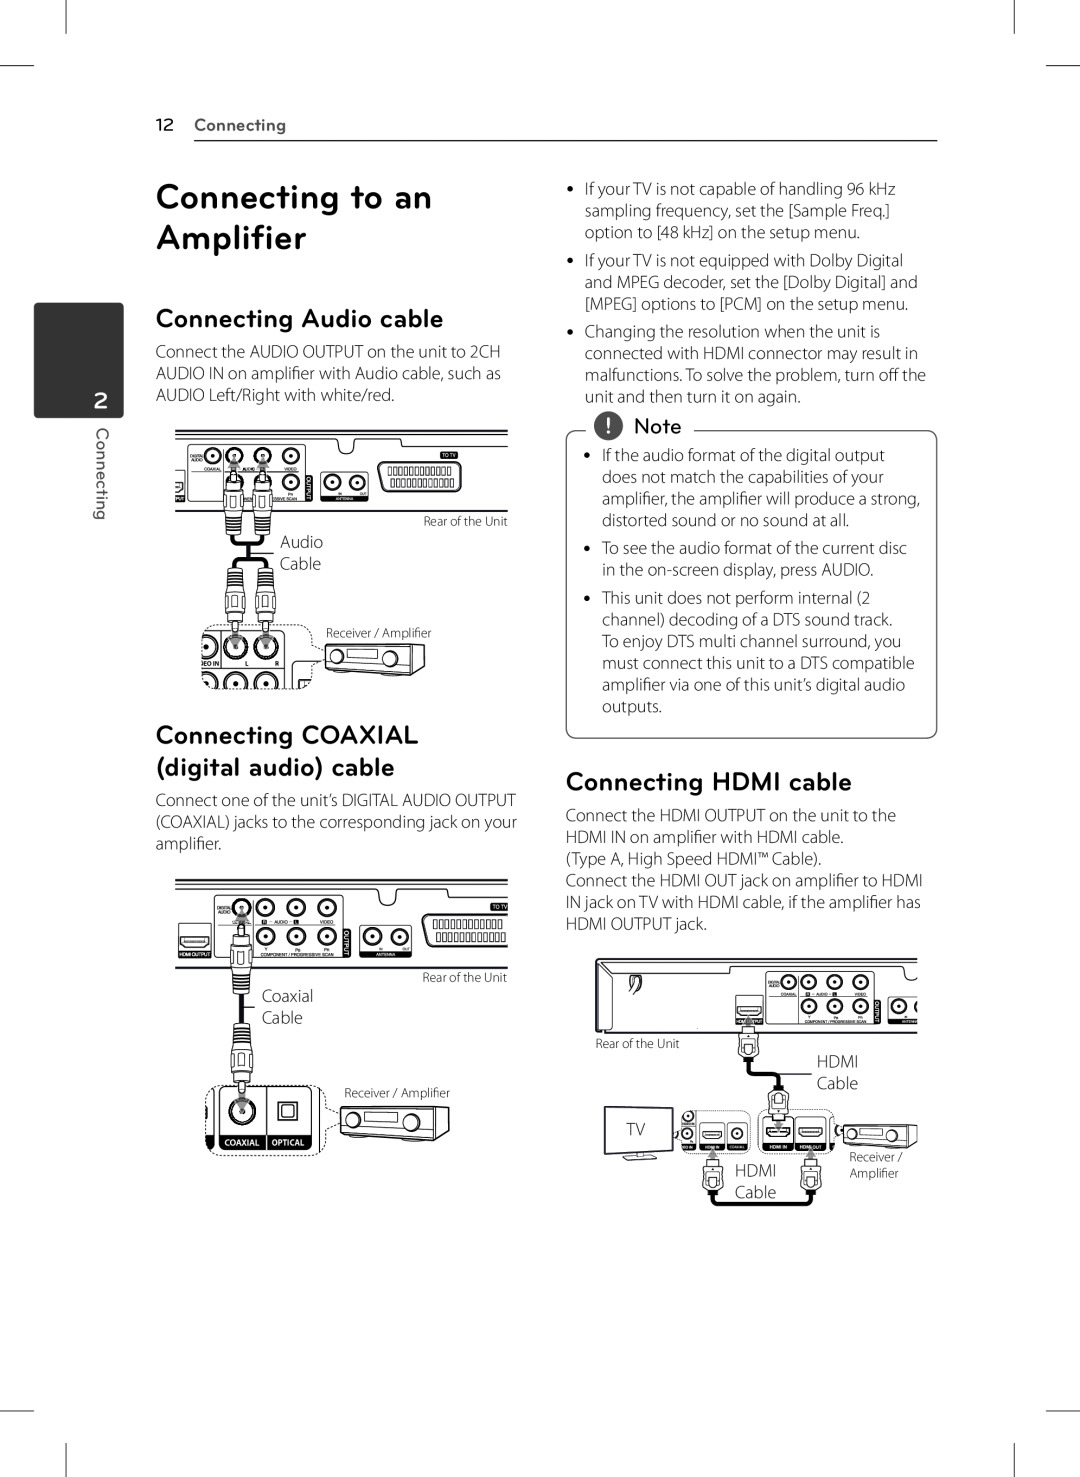 LG Electronics DVT699H Connecting to an, Amplifier, Connecting Audio cable, Connecting COAXIAL digital audio cable 